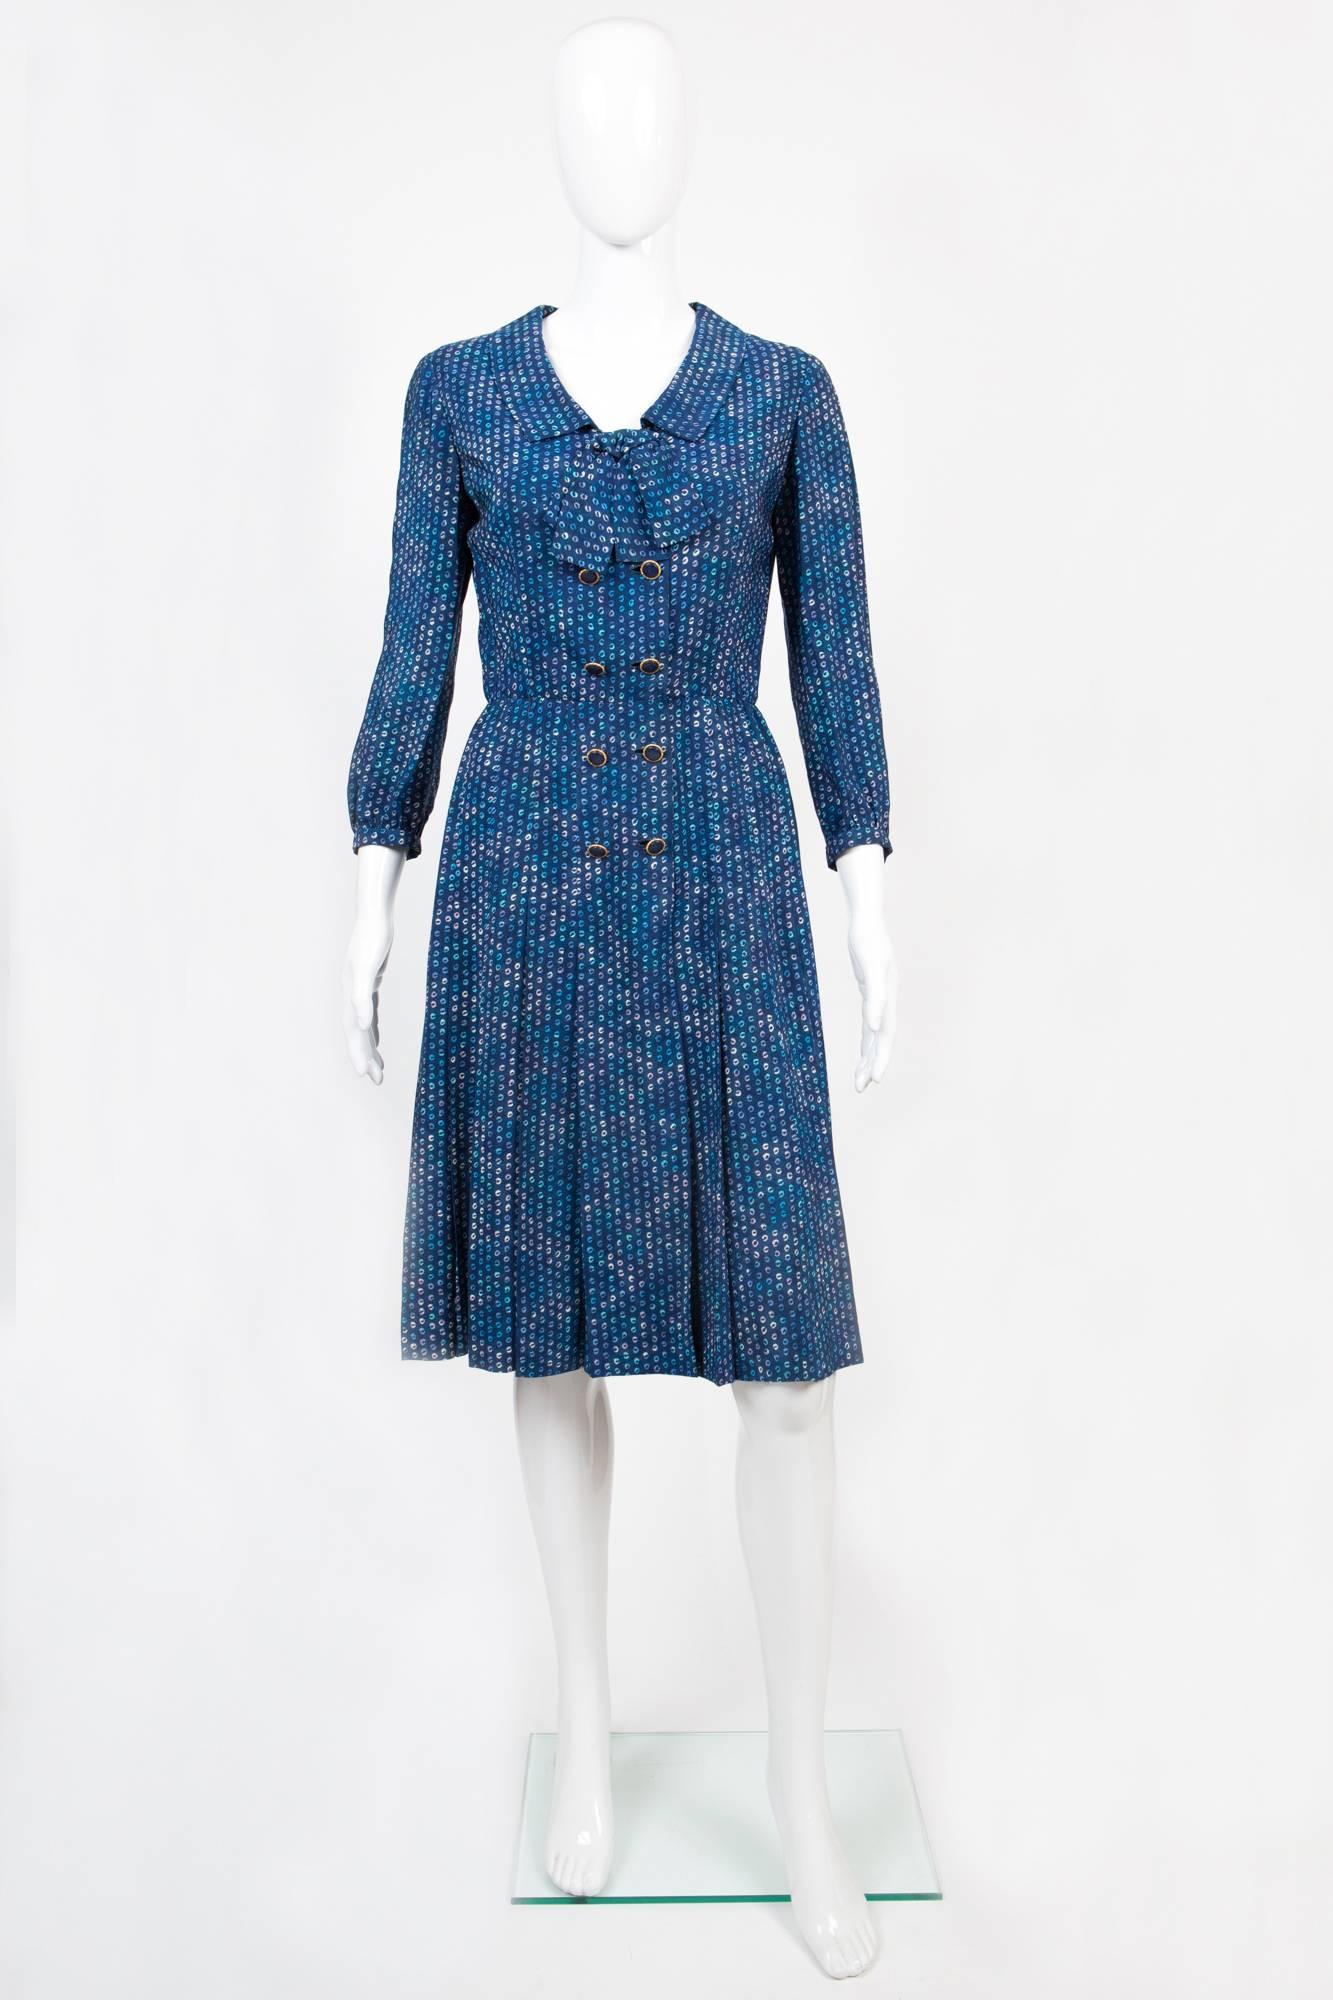 Iconic 1967s Haute Couture Chanel numbered dress N° 55 364 featuring a blue printed pattern, a large color, a double button opening, a front bow detail, 3/4 sleeves.
Accrocs shoulder: 38cm
Estimated size 36fr
In excellent vintage condition. Made